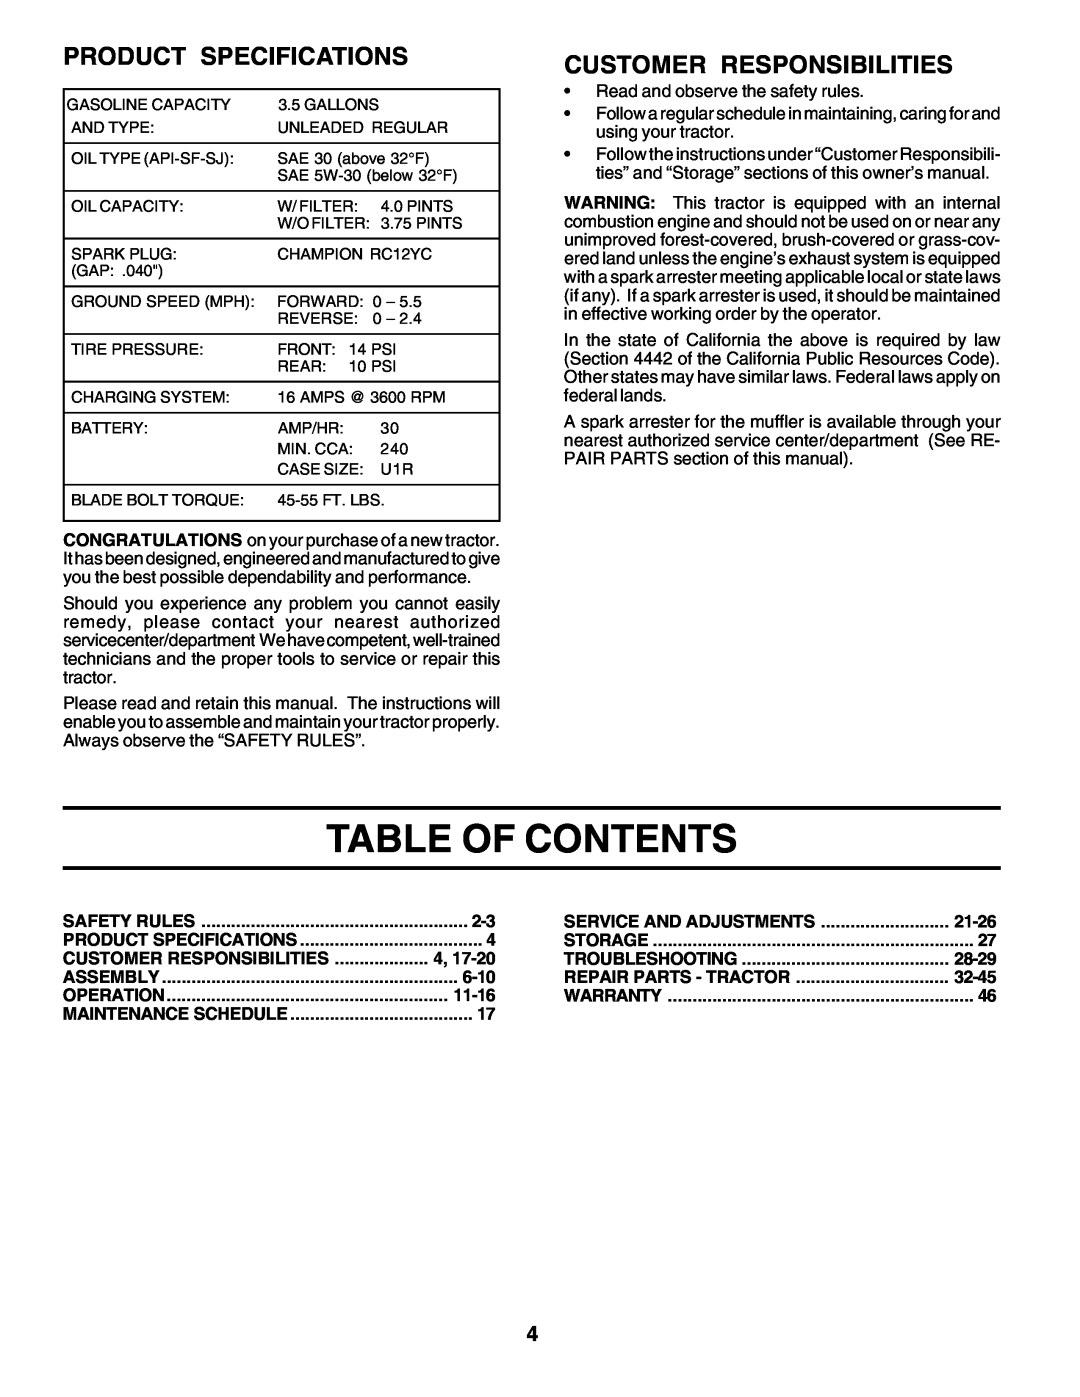 Poulan 180200 owner manual Table Of Contents, Product Specifications, Customer Responsibilities 